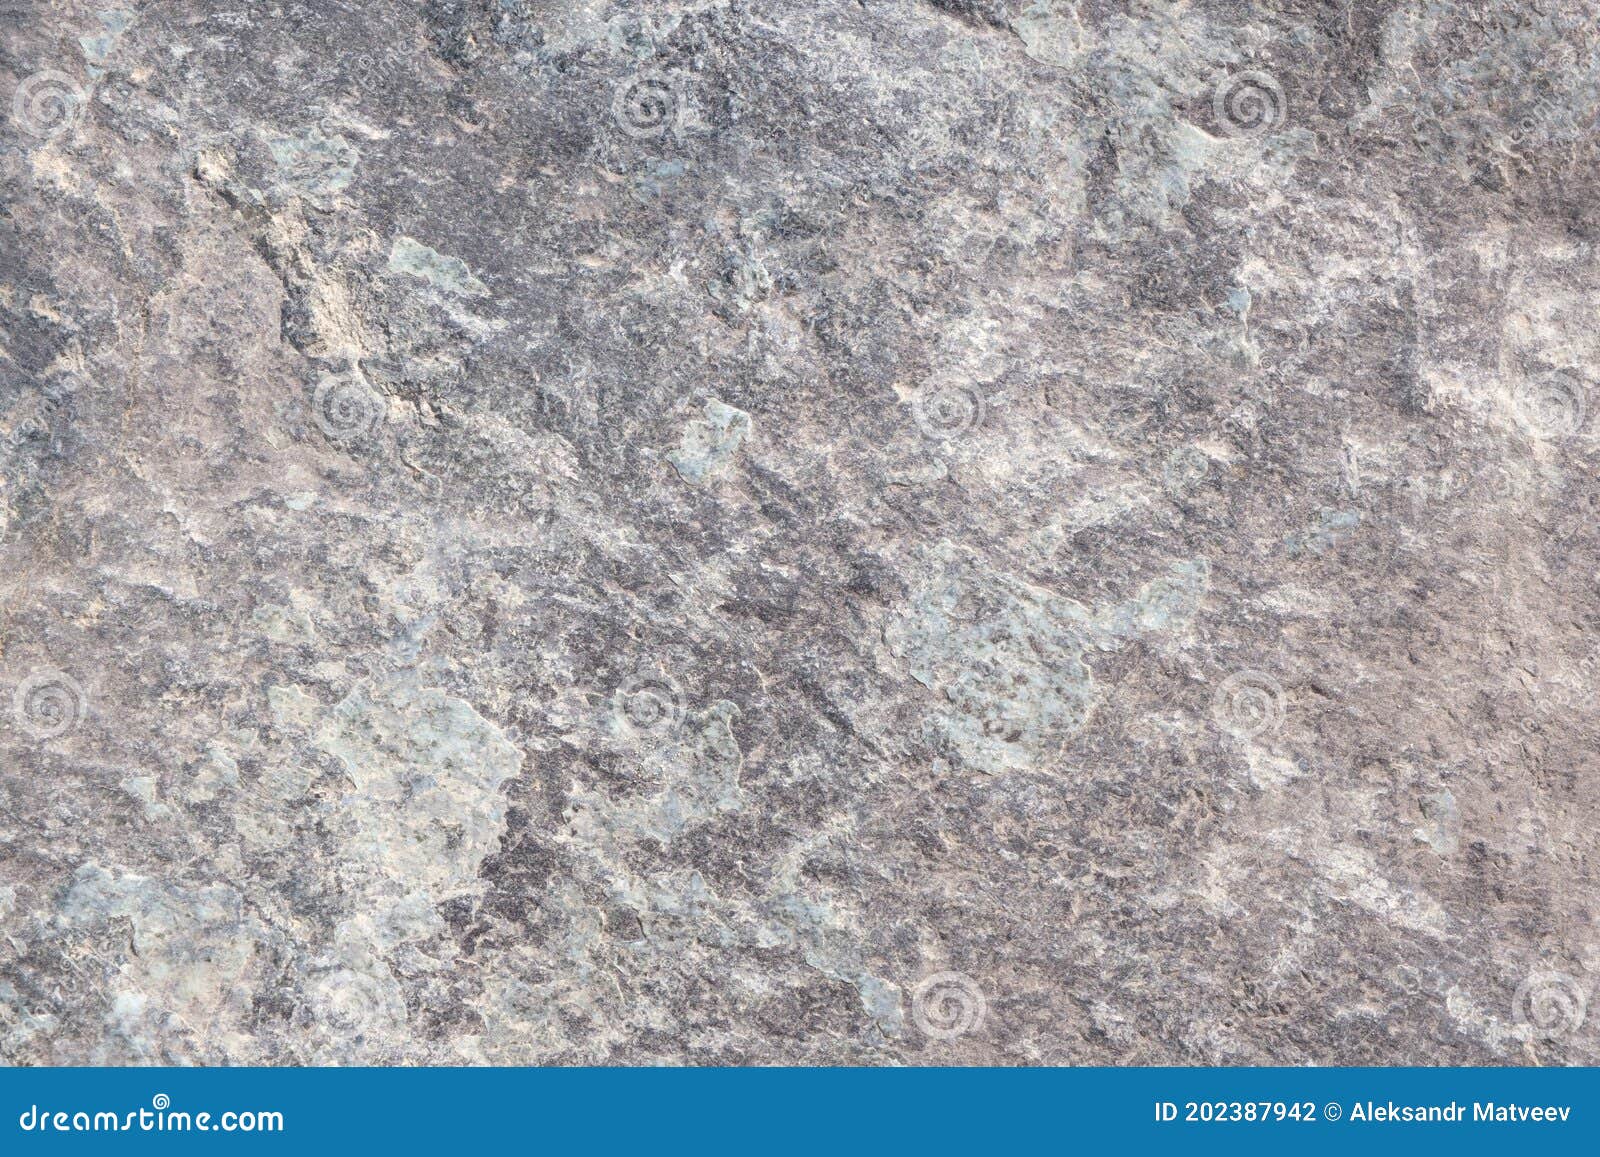 narural stone slate background or texture.